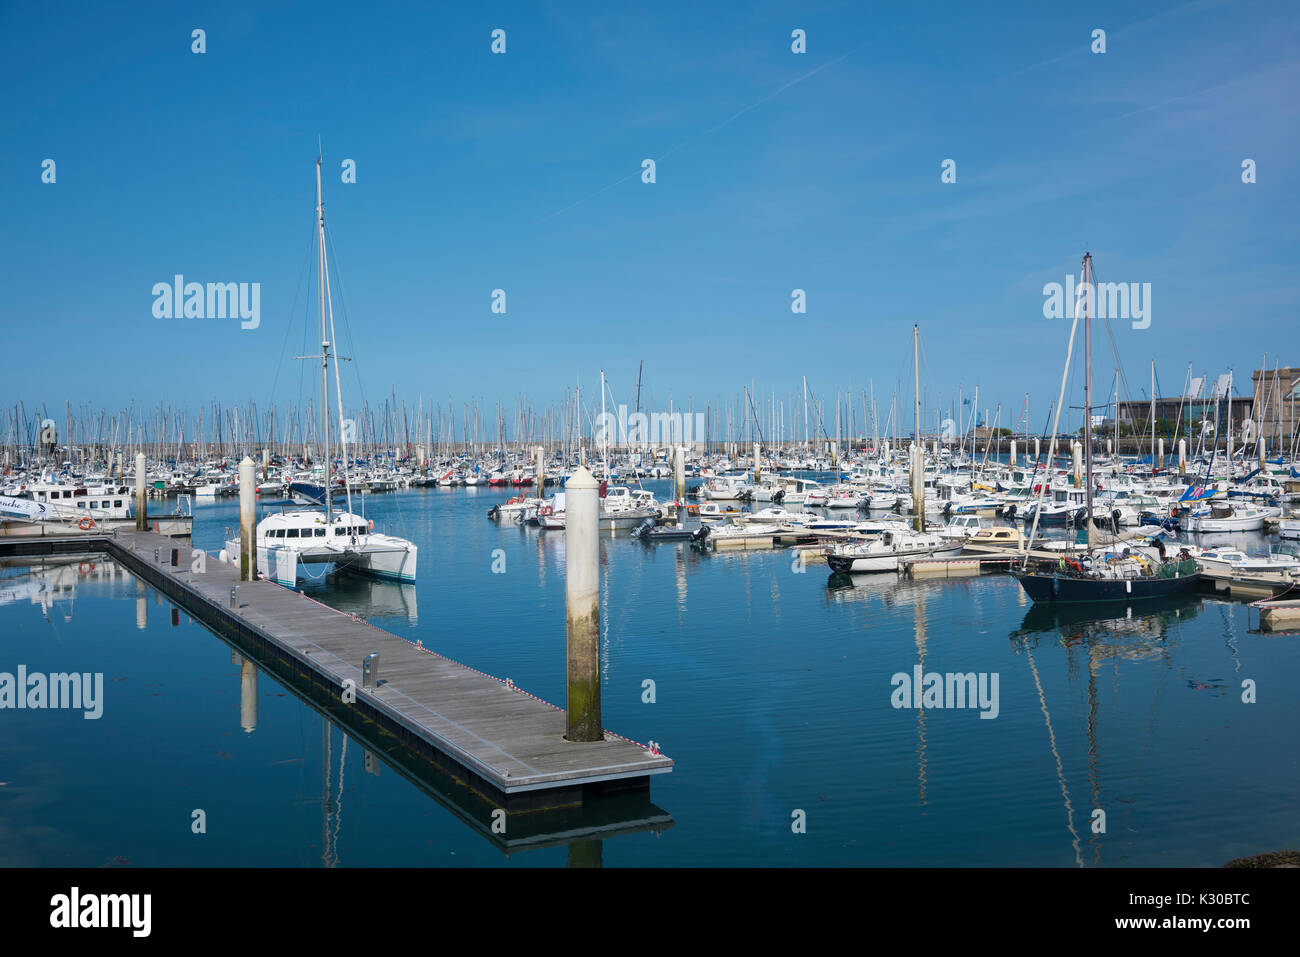 Boats in marina, in Cherbourg, France Stock Photo